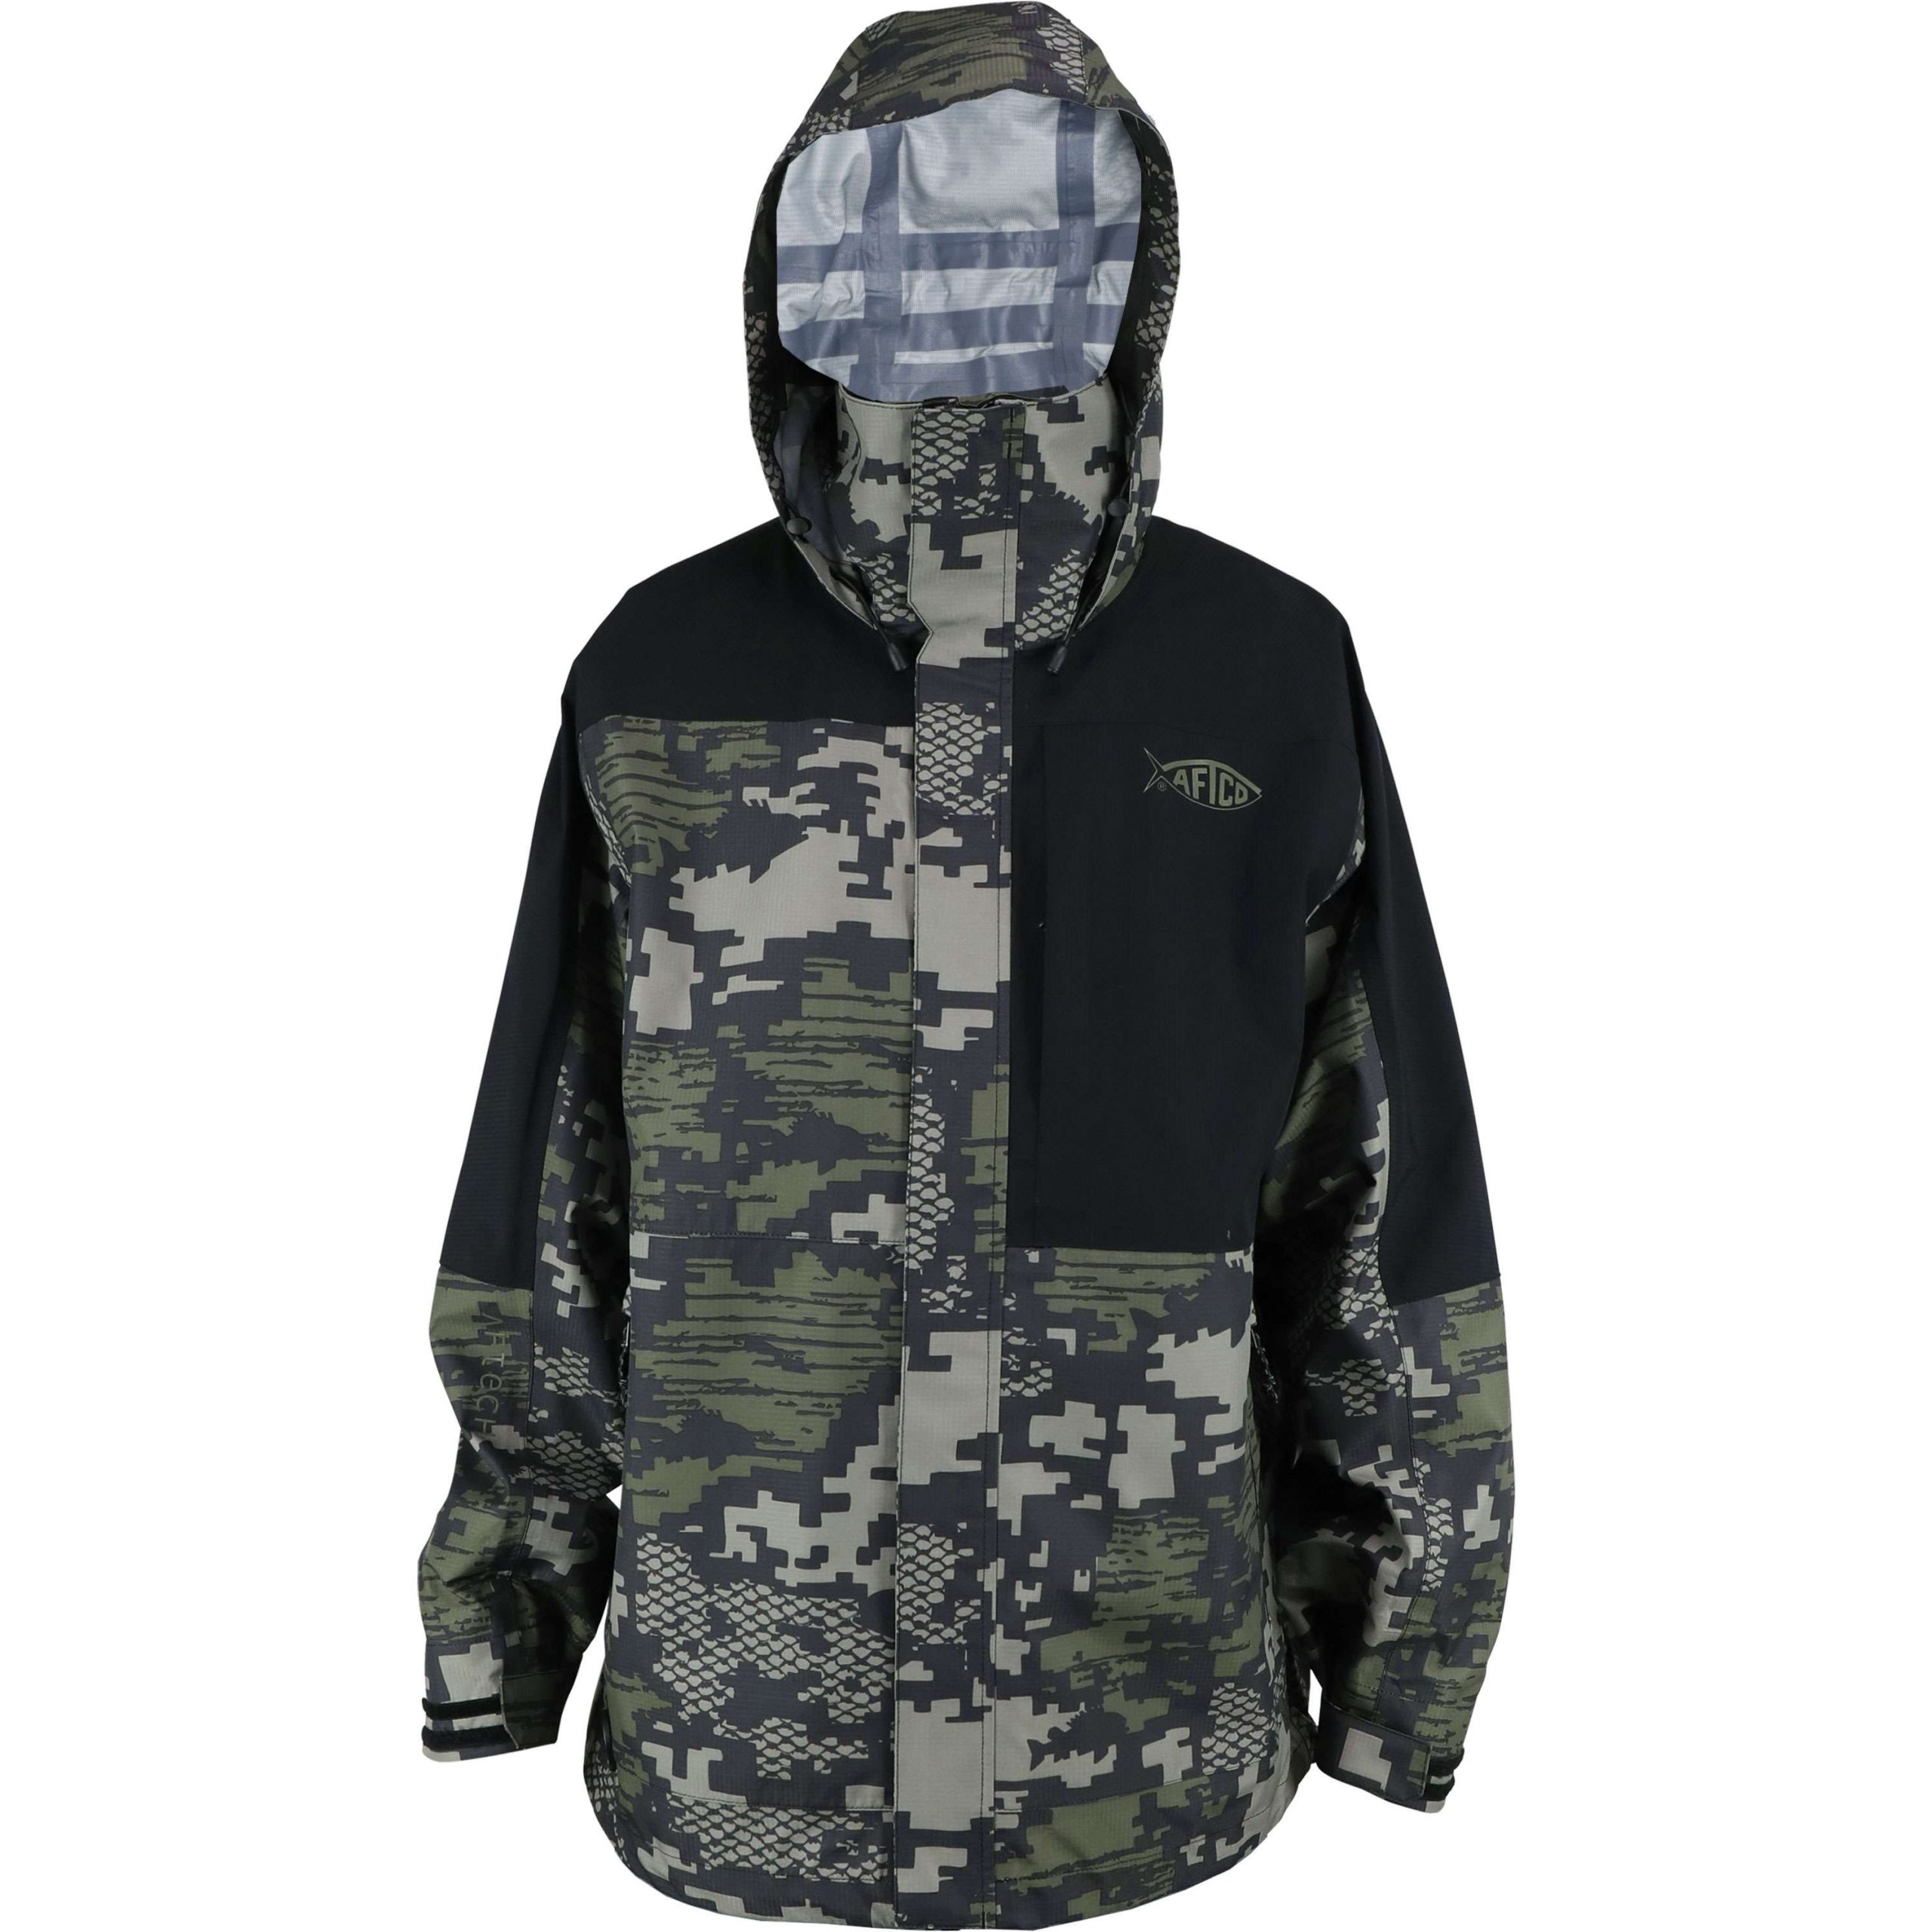 <p><strong>AFTCO Barricade Jacket</strong></p><p></p><p>Similar to the Barricade Elite, worn by AFTCOâs Bassmaster Elite pro staff, this iteration provides high end features at a competitive price. The jacket features AFTCOâs 3L polyester ripstop construction, with 20K water resistance, 15K breathability and YKK zippers for a reinforced zipper locking system. Zippered side pockets, D rings and AFTCOâs Speedvent hook are more features. Available in Green Camo, Black, Light Gray. $249. <a href=